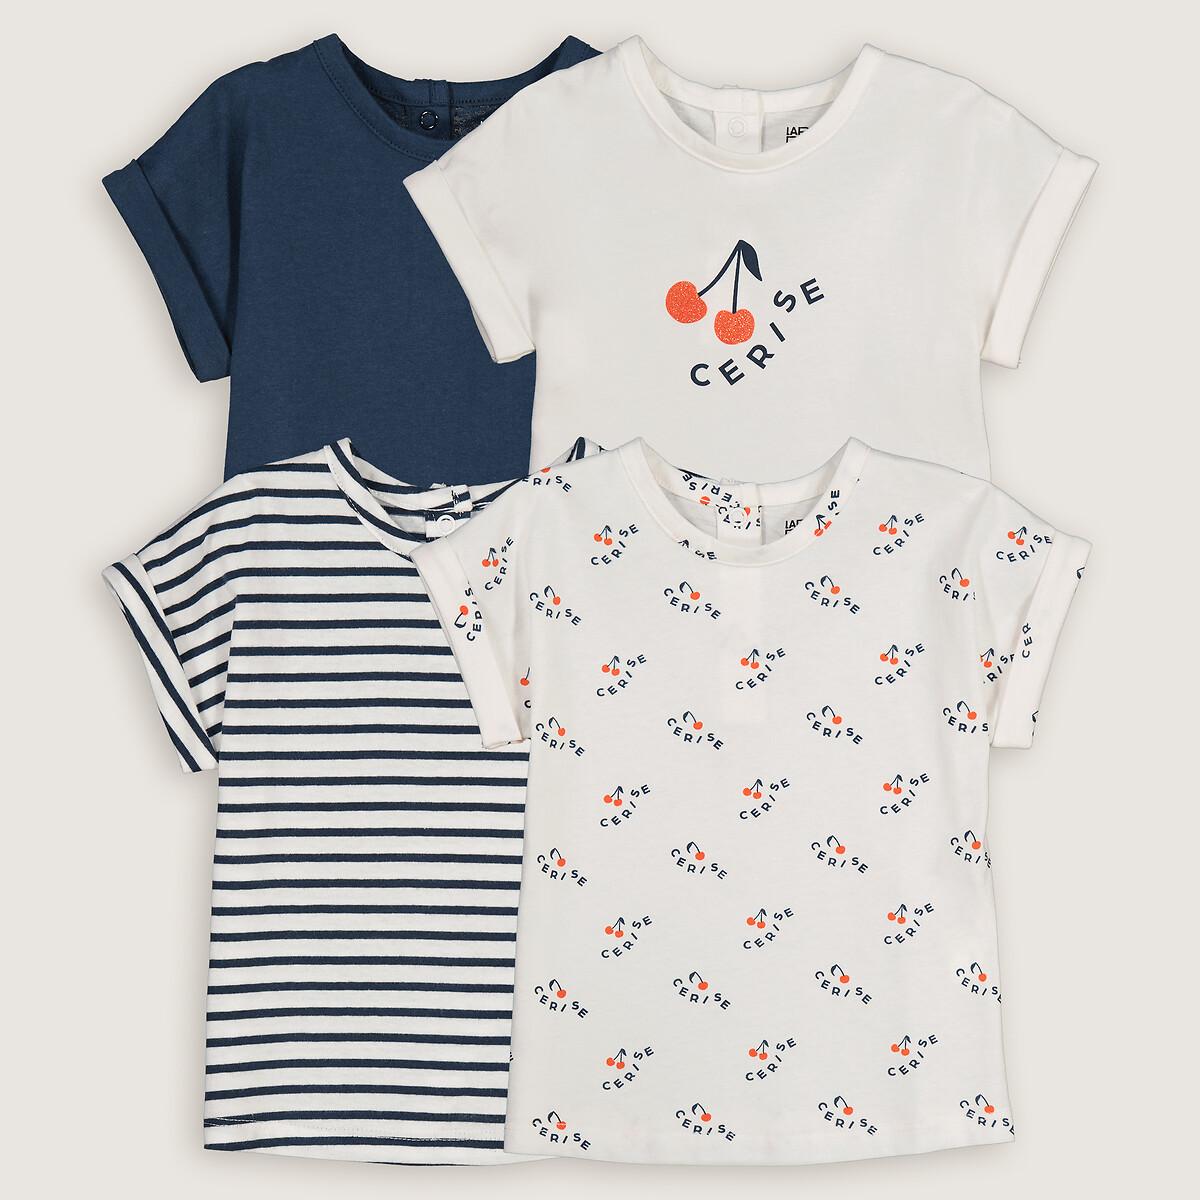 La Redoute Collections  4er-Pack T-Shirts 